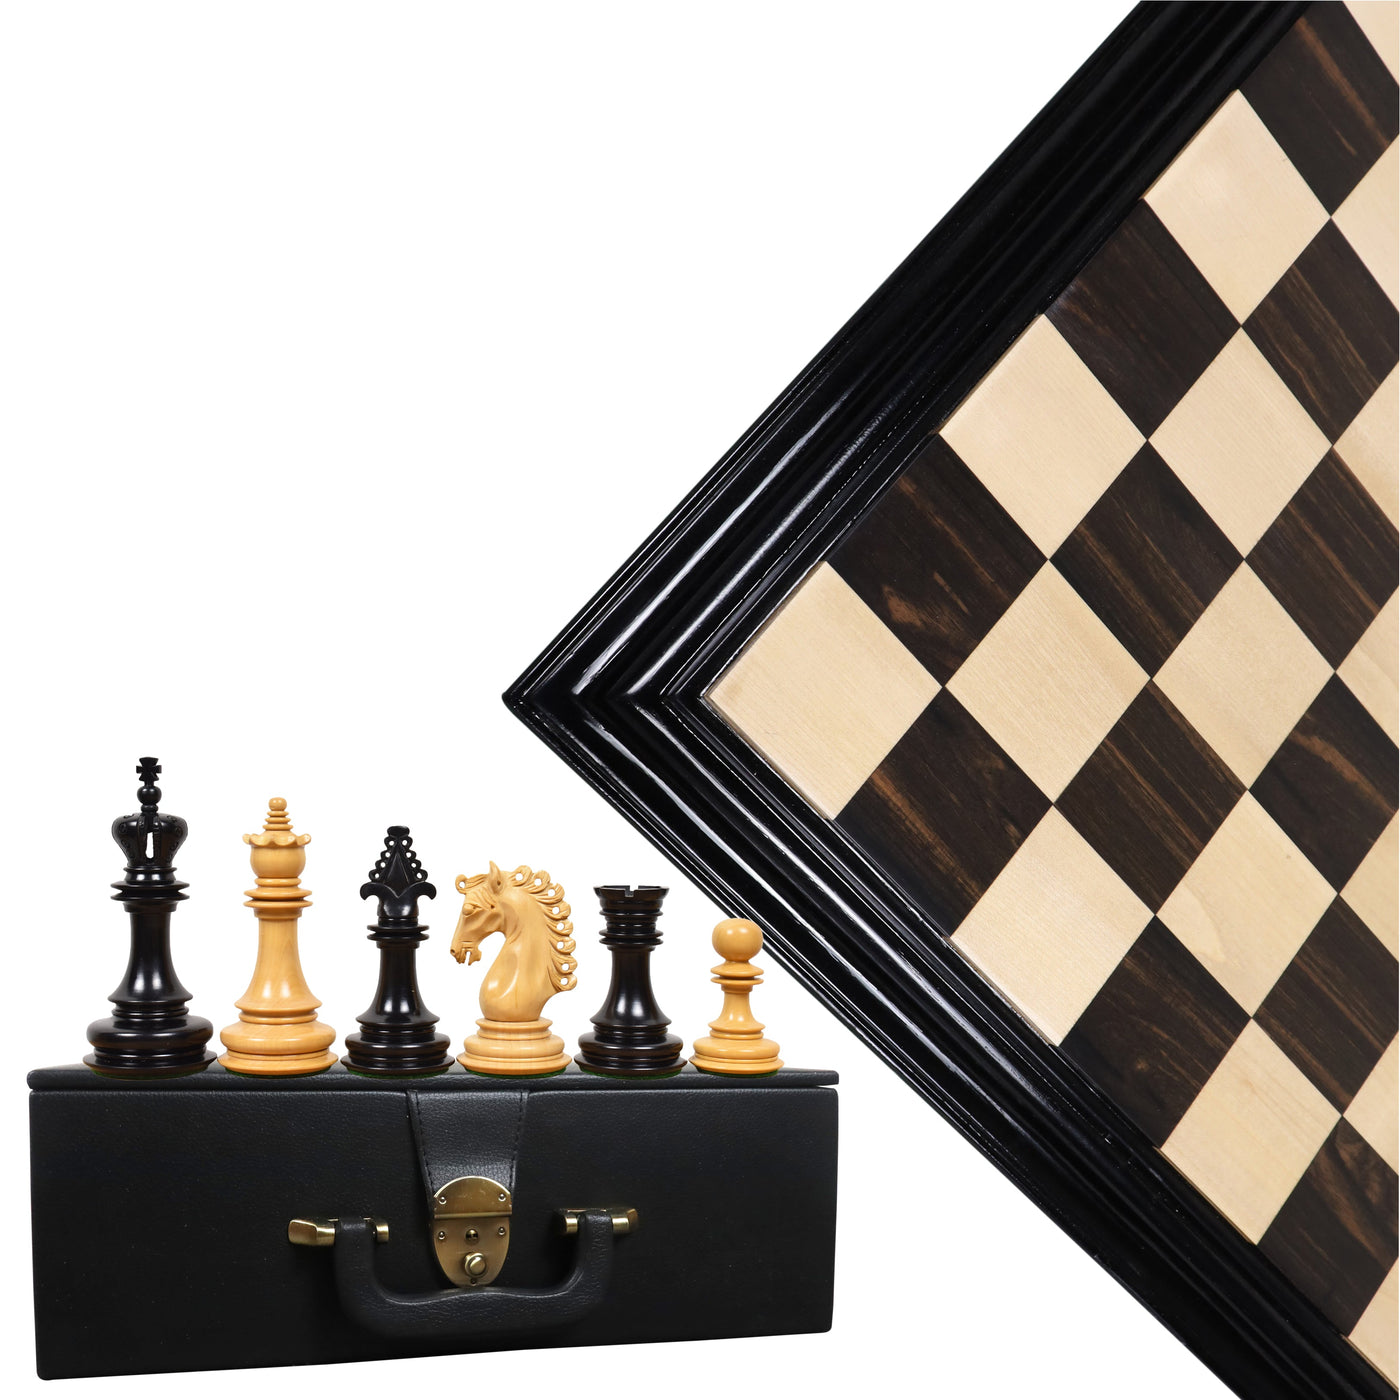 Combo of 4.5" Carvers' Art Luxury Chess Set - Pieces in Ebony Wood with Board and Box